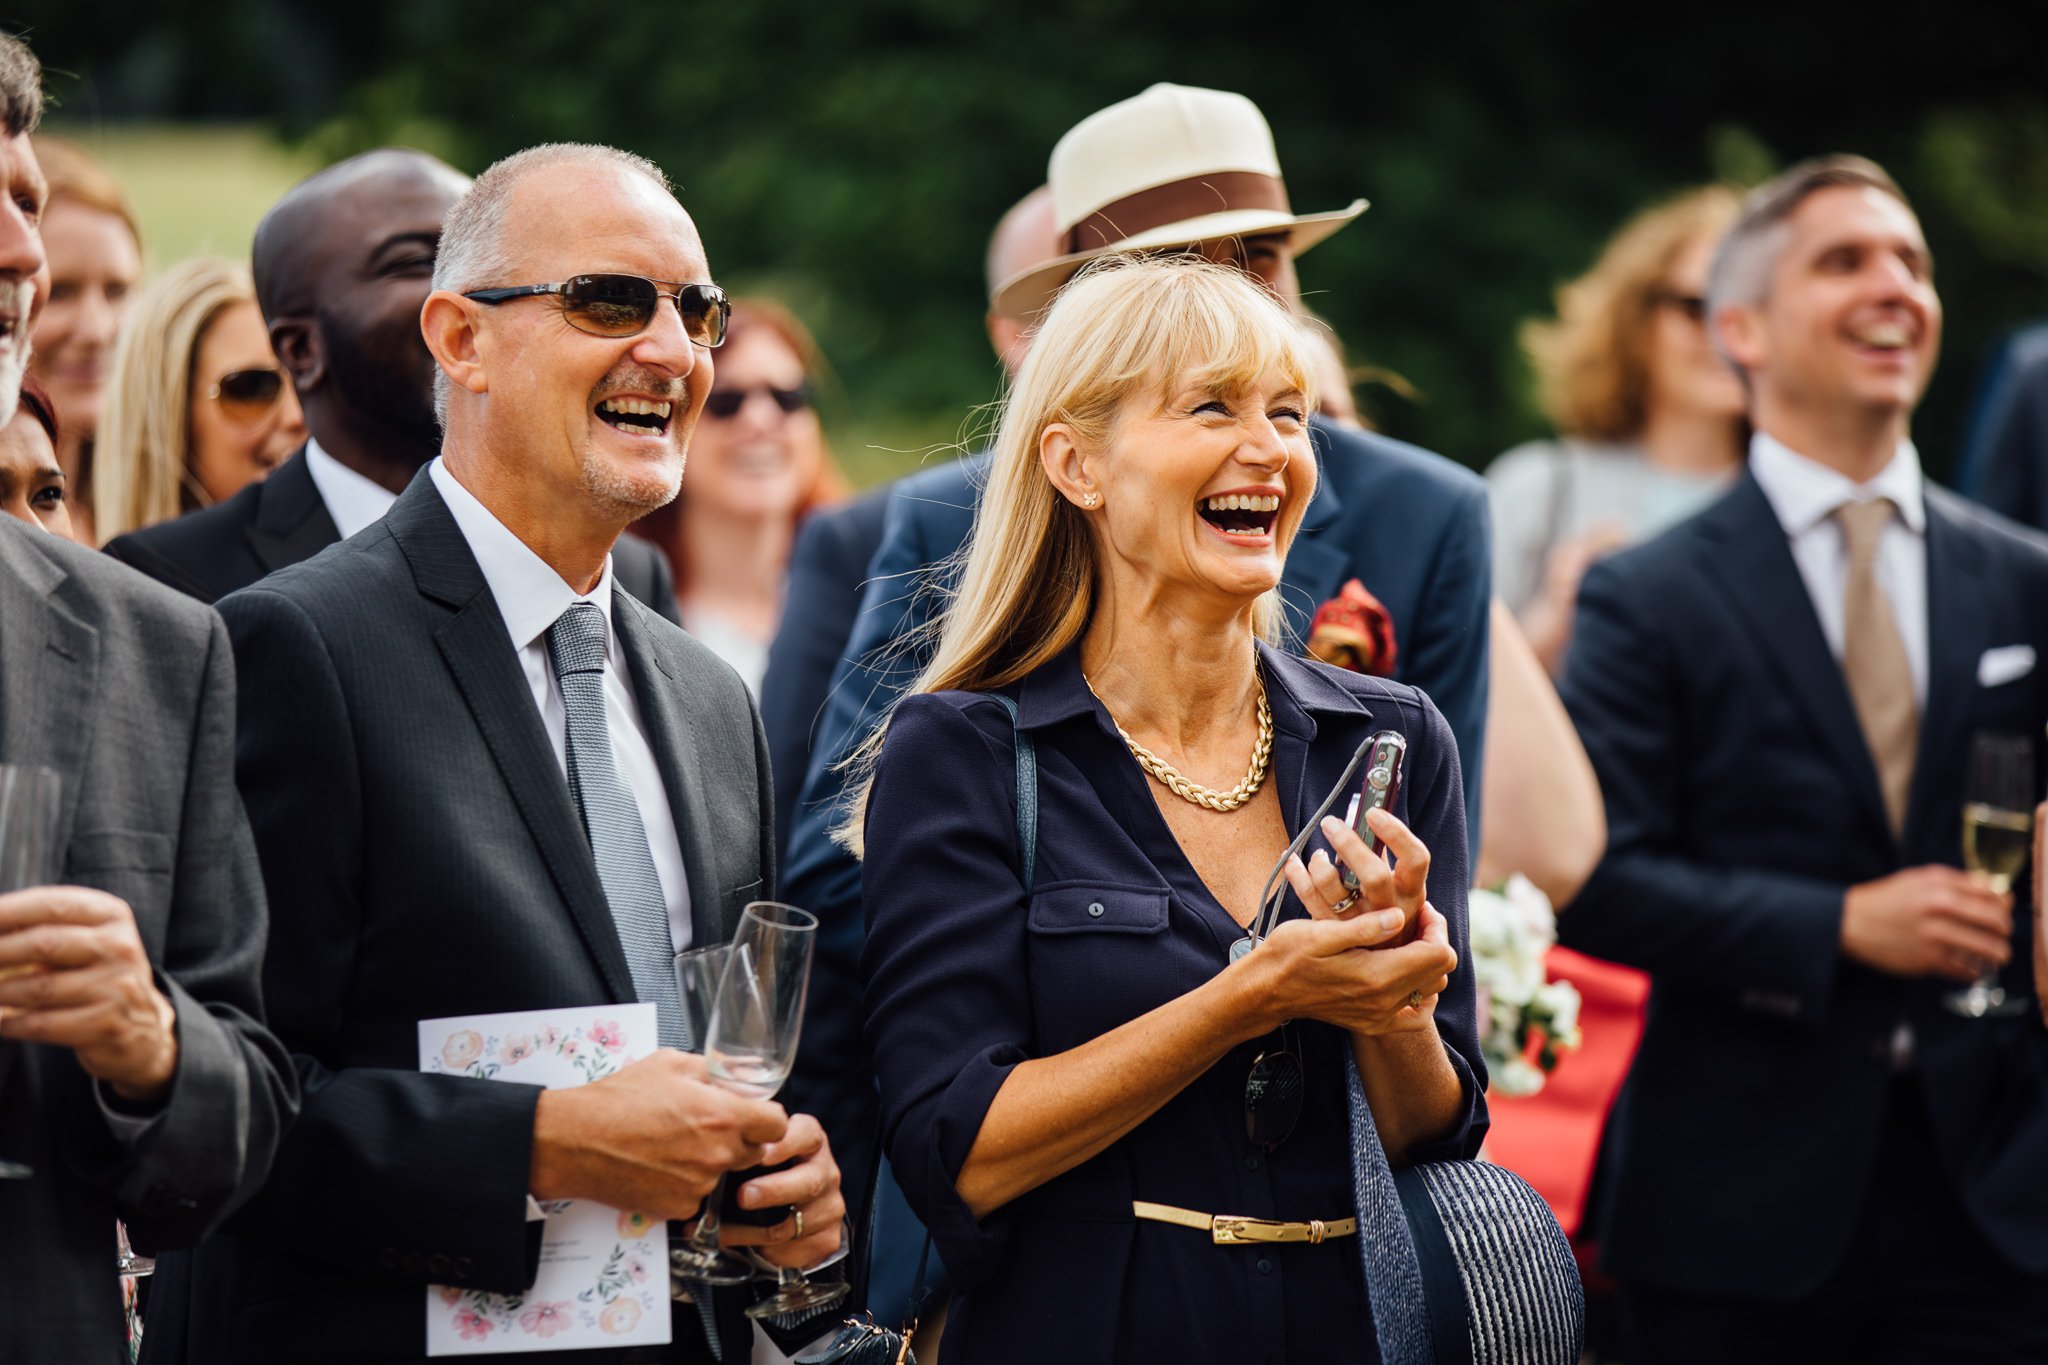  Guests laugh during the speeches at  Wadhurst castle wedding venue 